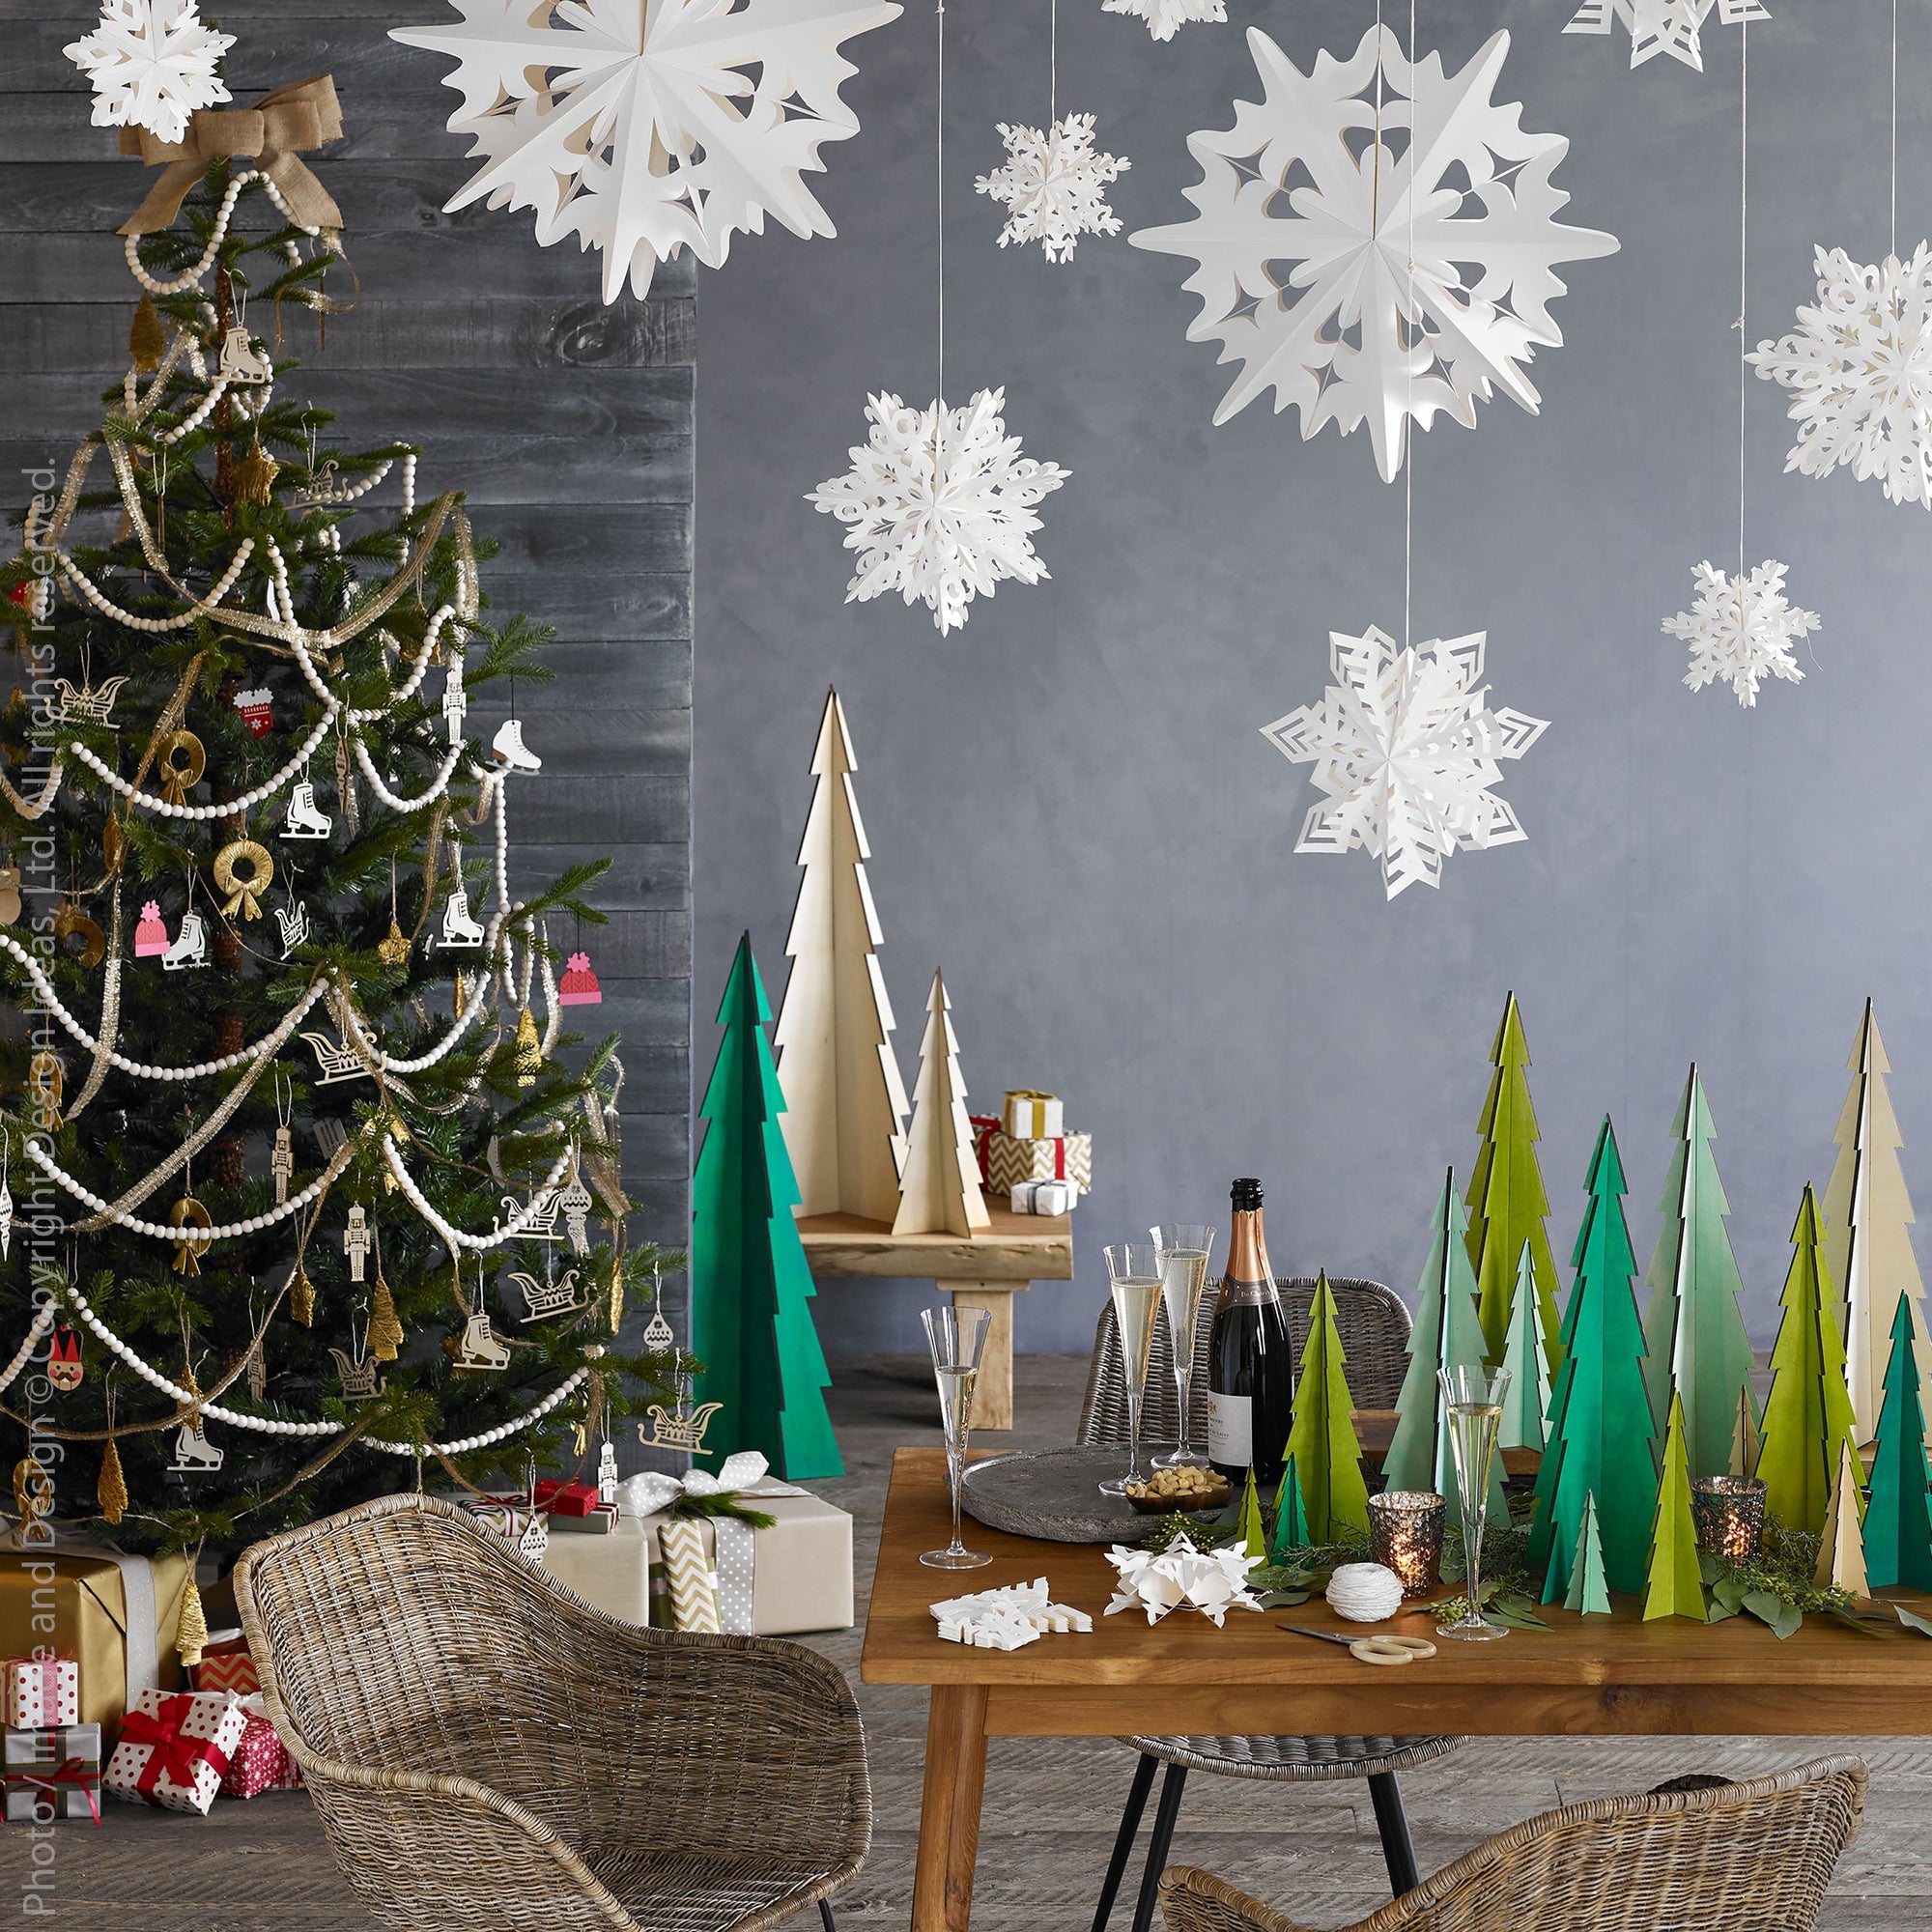 Tannenbaum Wood Tree (Giant) - Black Color | Image 2 | From the Tannenbaum Collection | Exquisitely created with natural plywood for long lasting use | Available in white color | texxture home